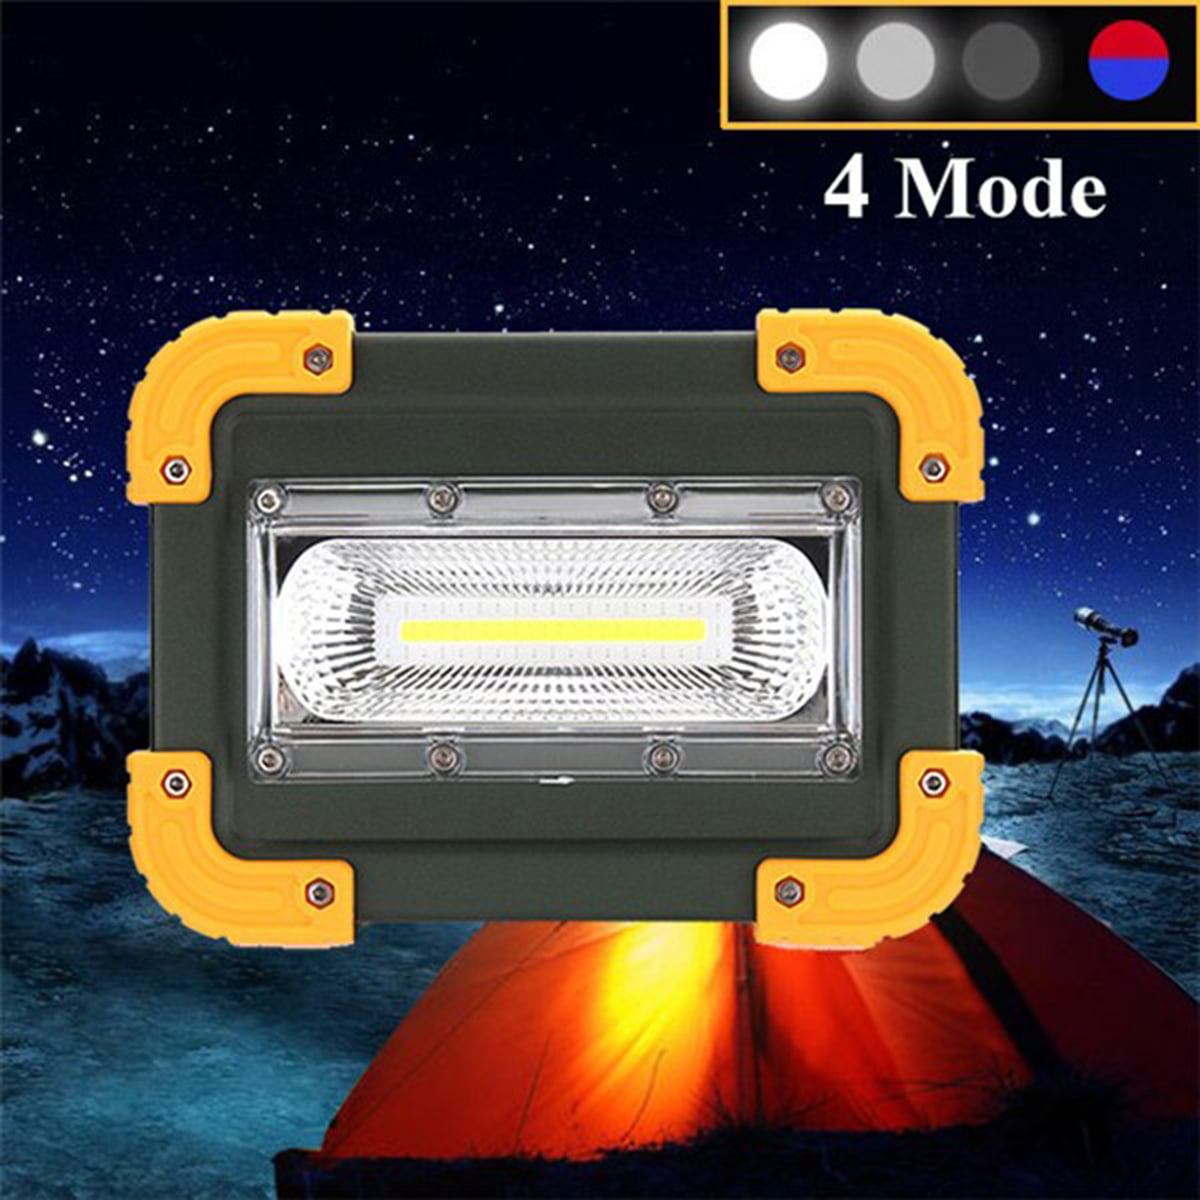 LED Floodlight Light 30W Portable Rechargeable Outdoor Security Flood Spotlight 